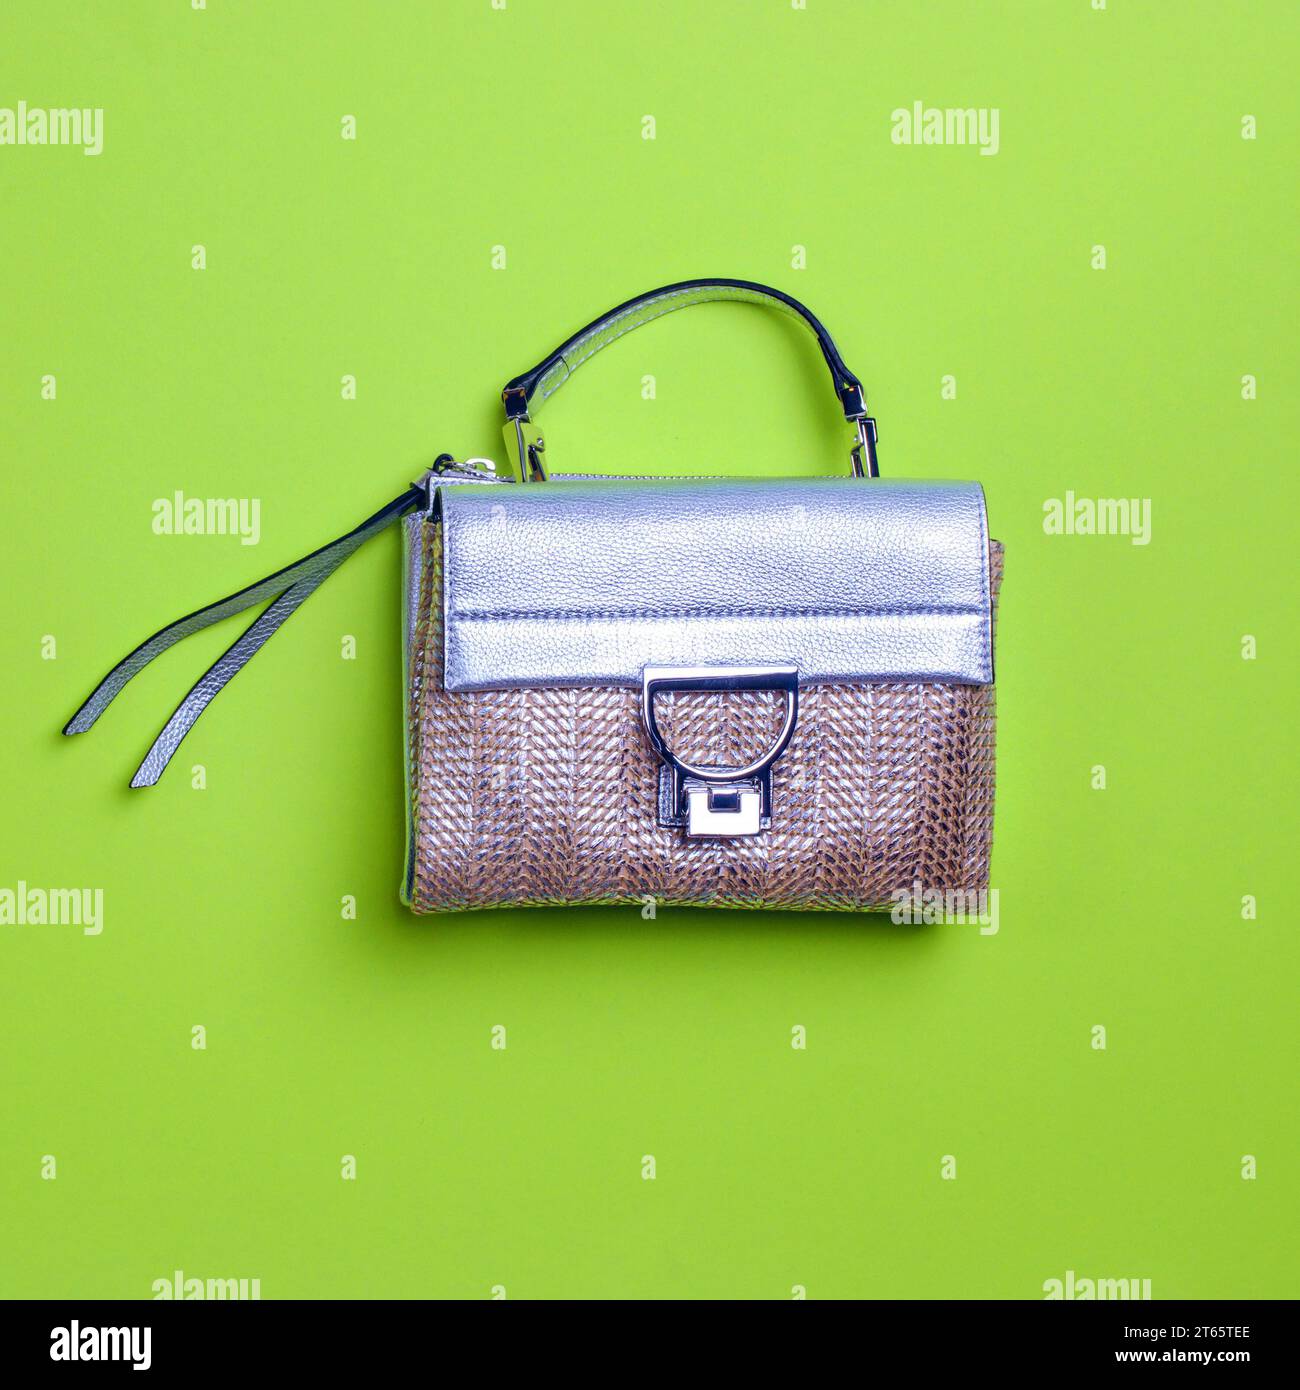 Bold woven design female handbag with silver leather flap, top handle, and zipper pull isolated on a green background with copy space. Creative design Stock Photo